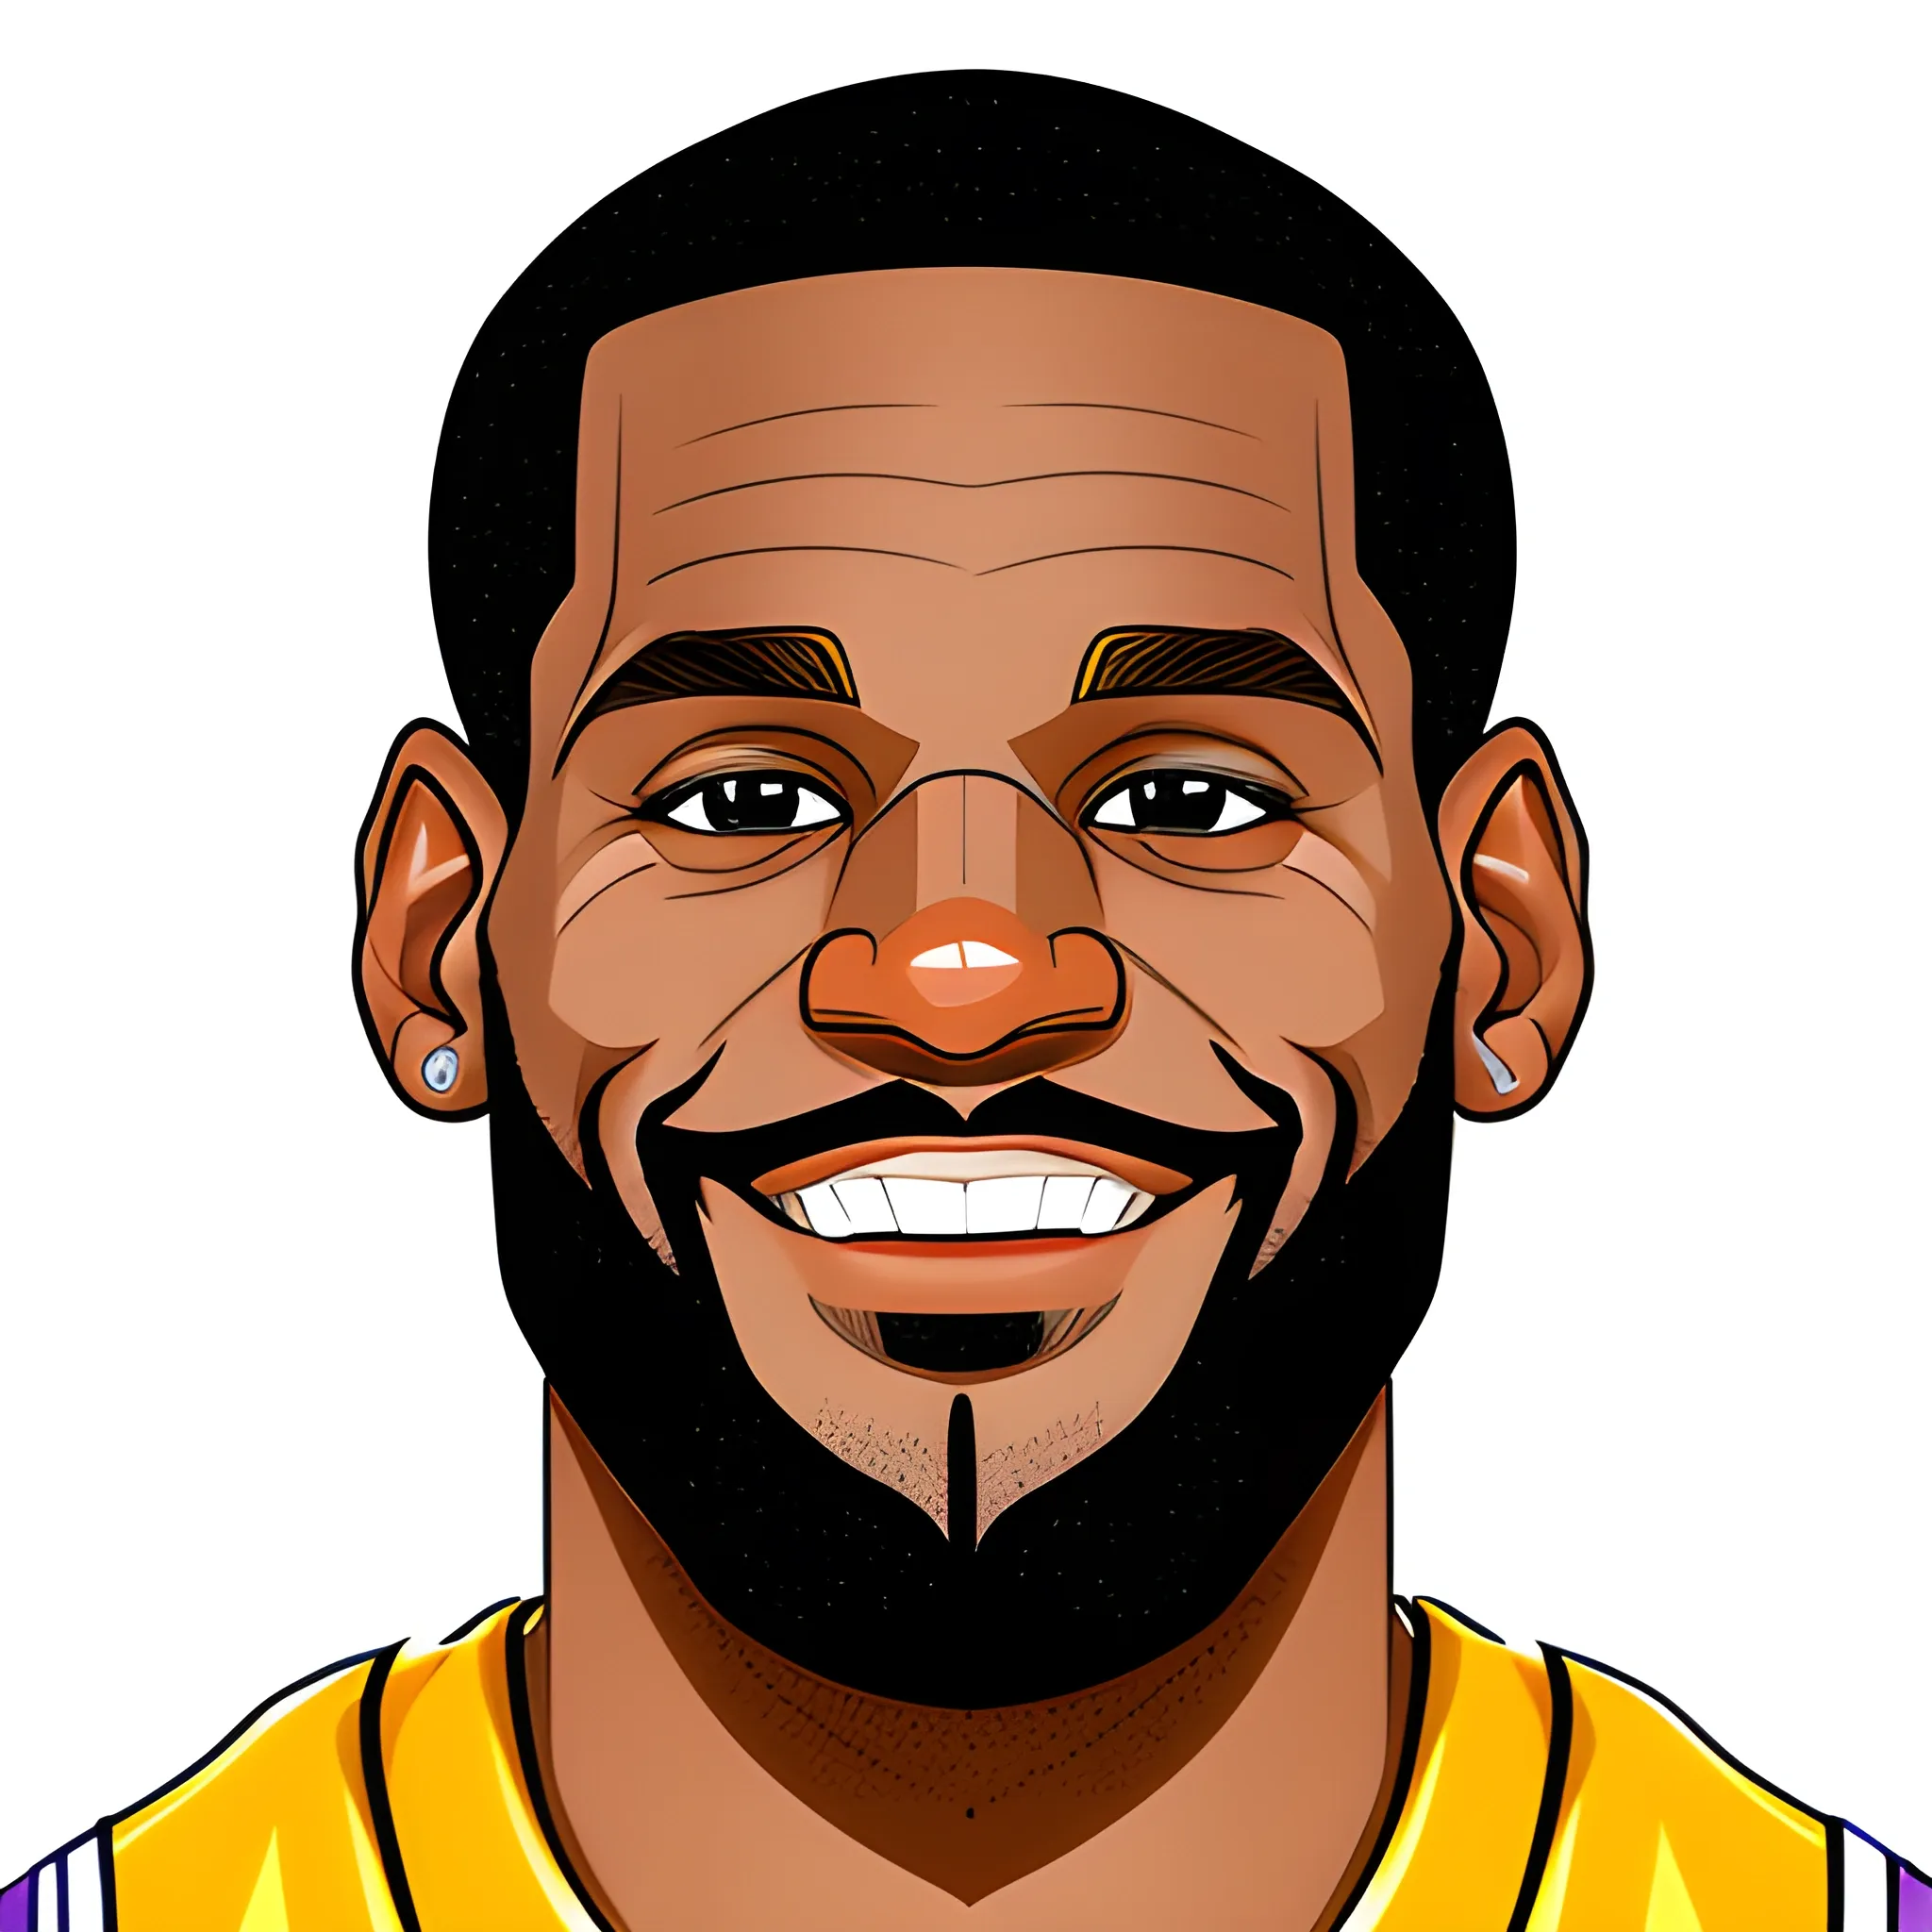 Cartoon Digital Art of Lebron smiling at the camera in a Lakers jersey icon with transparent background, Cartoon